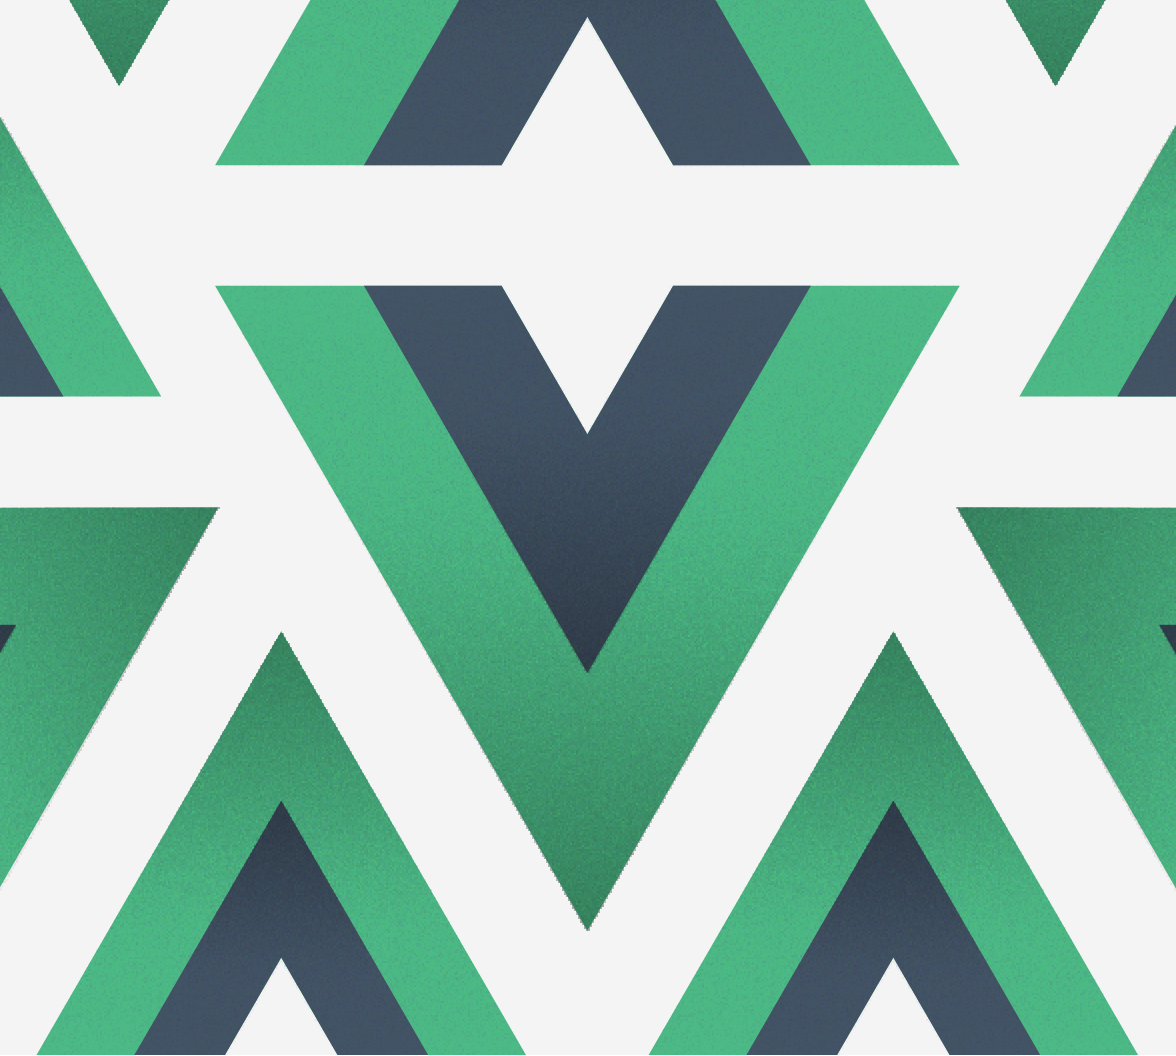 Getting Started With Vue 3: Composition Api